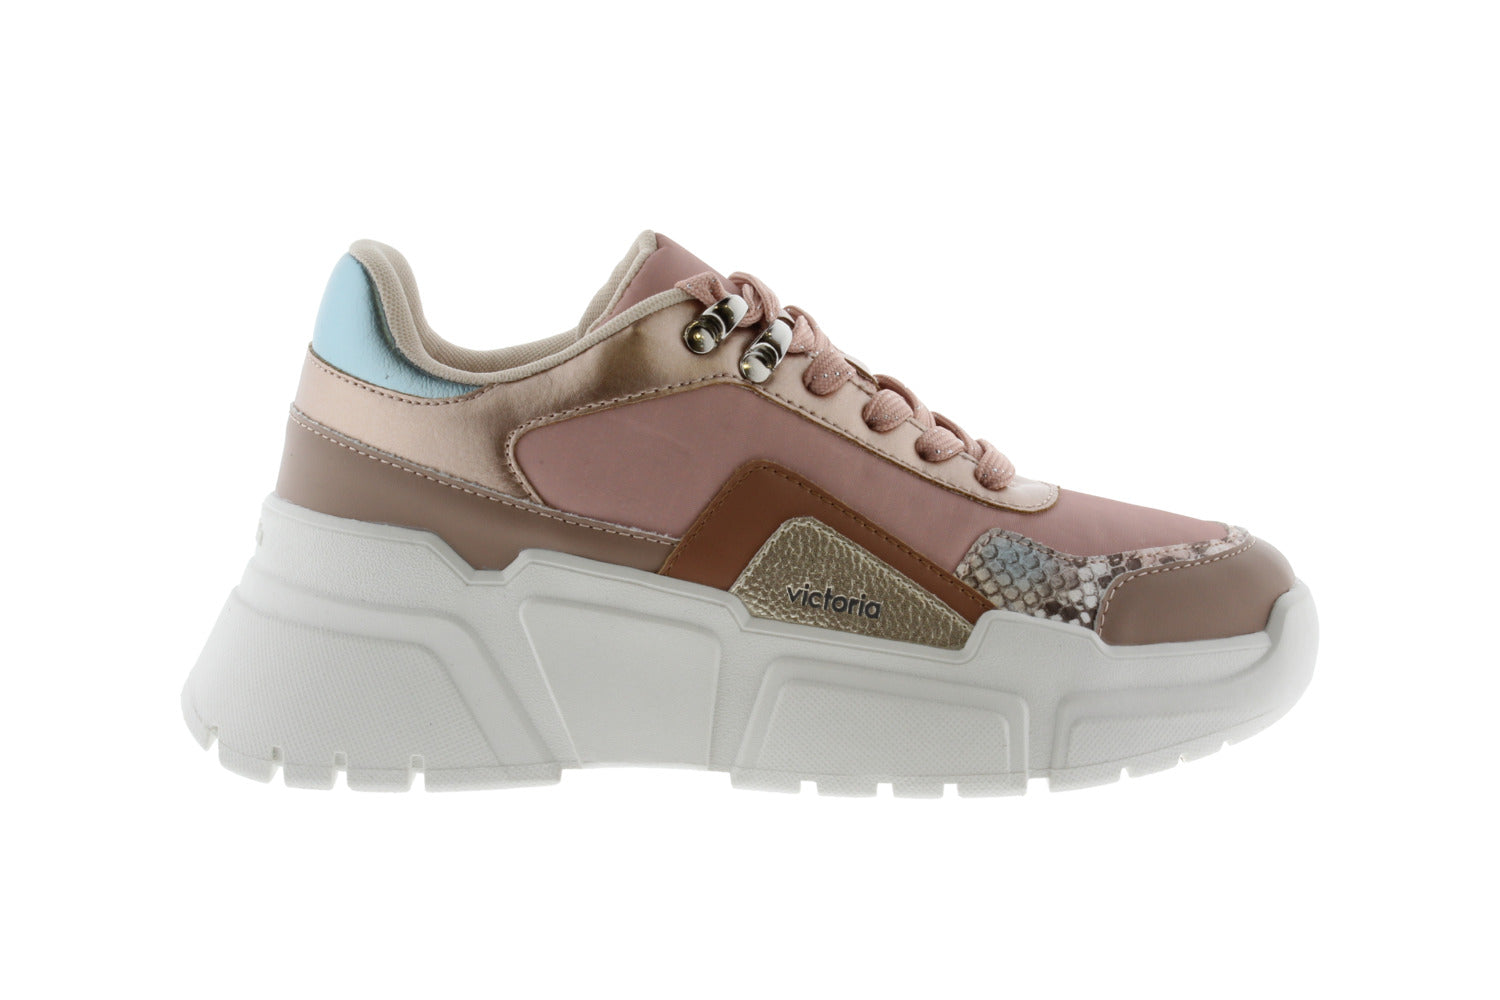 Victoria Shoes - Monochrome Totem Sneaker - Nude / Rose